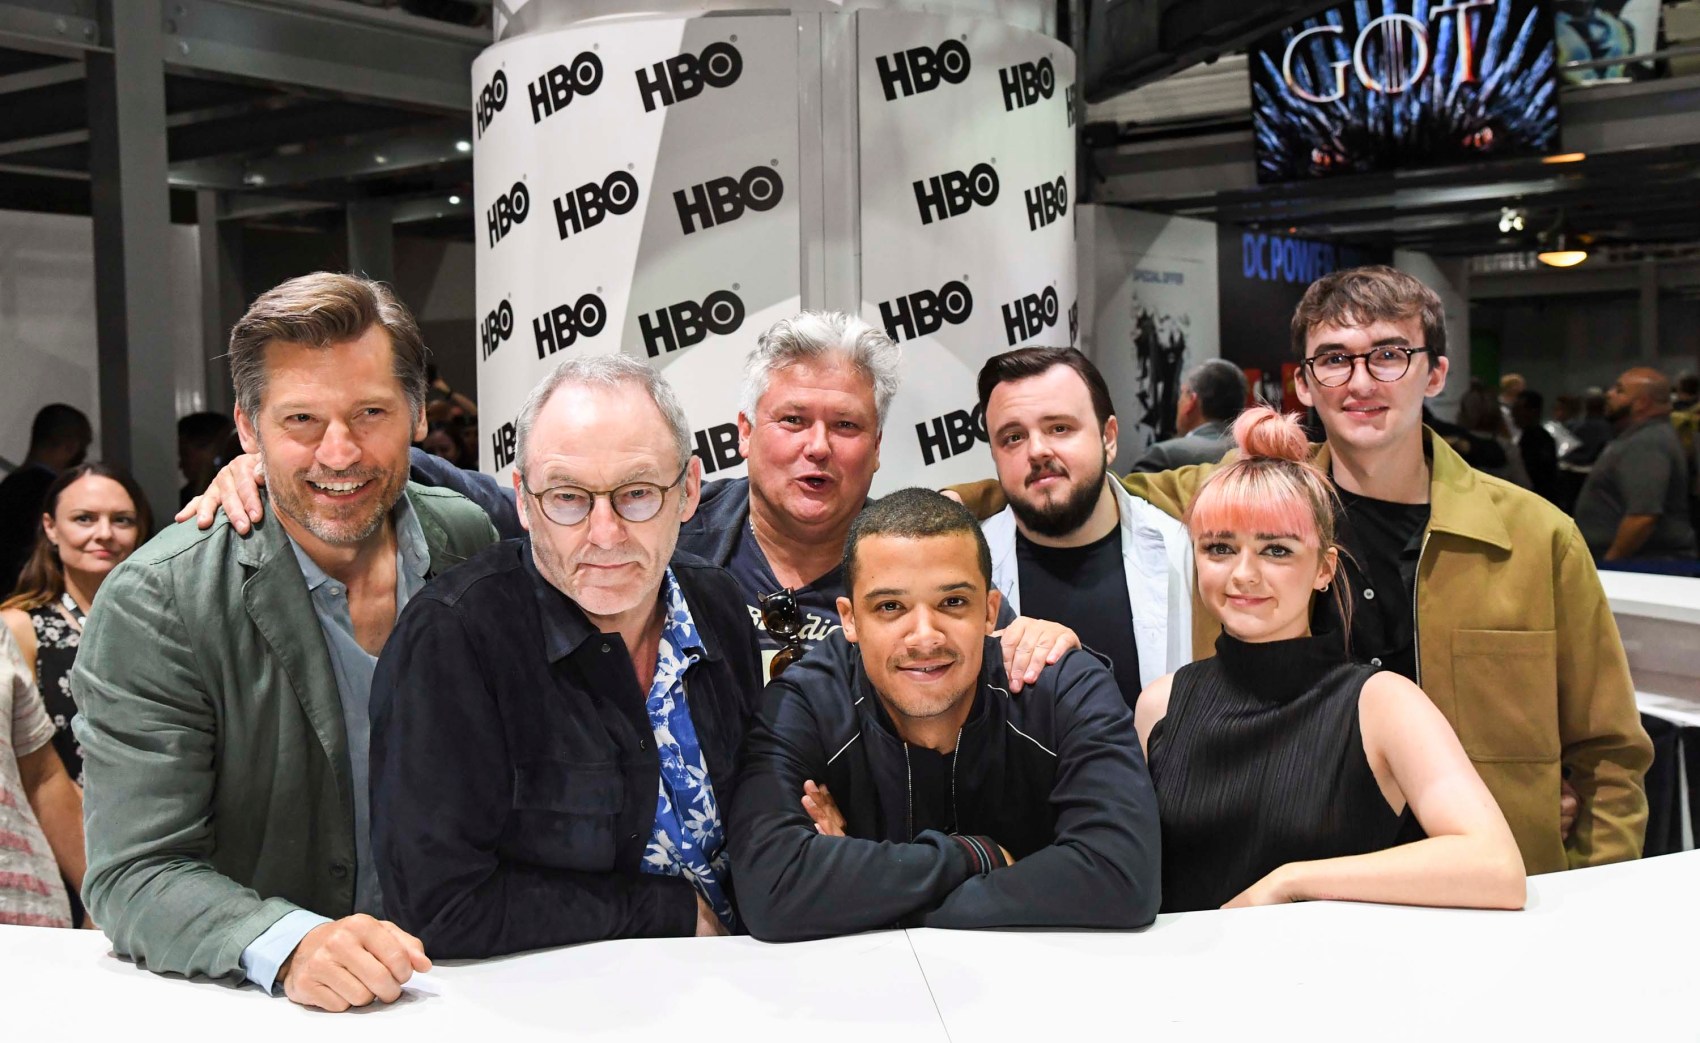 “Game Of Thrones” Comic Con Autograph Signing 2019